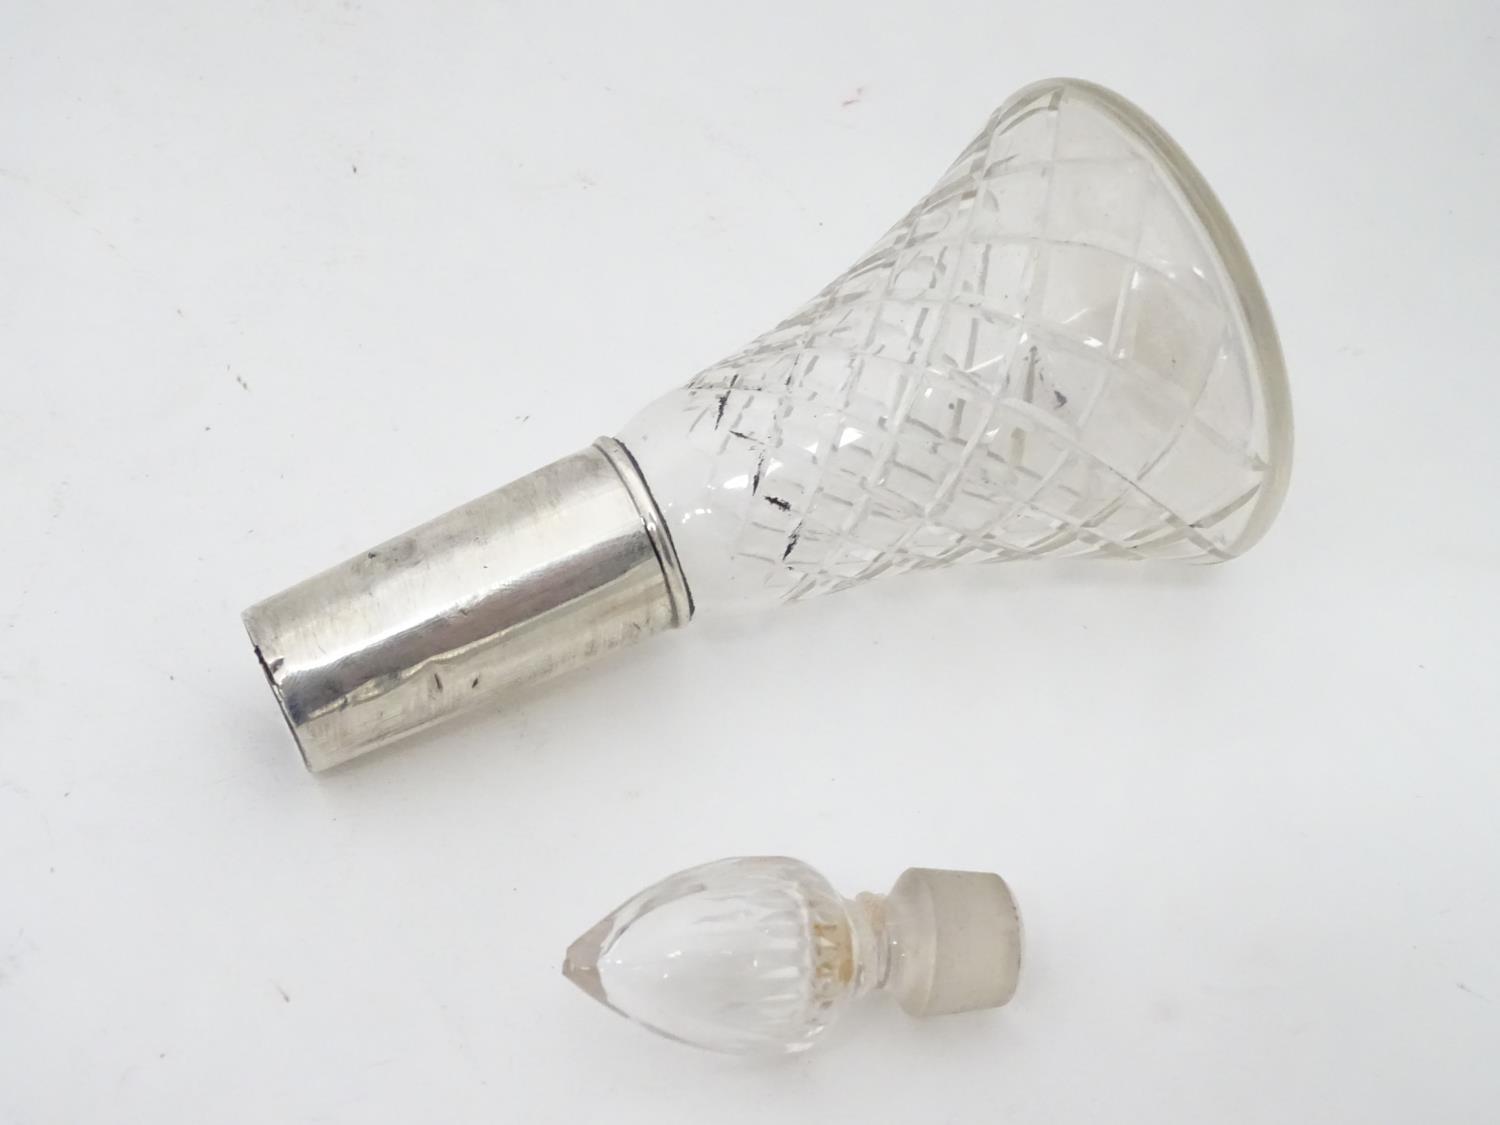 Victorian perfume / scent bottle Please Note - we do not make reference to the condition of lots - Image 4 of 5